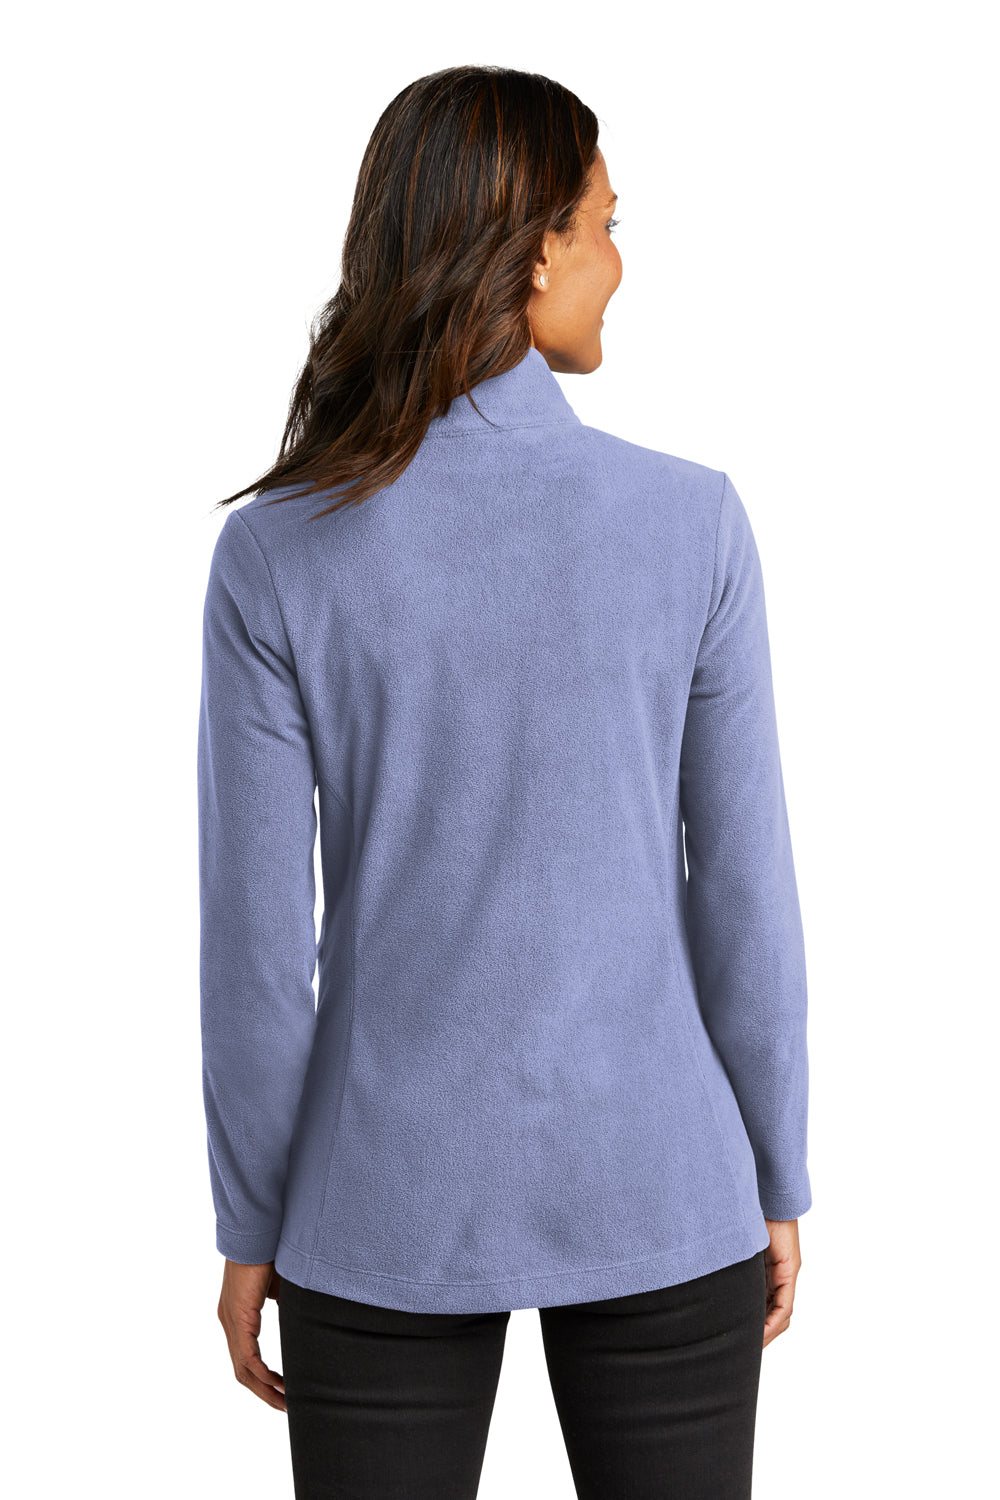 Port Authority L151 Womens Accord Microfleece Full Zip Jacket Ceil Blue Back